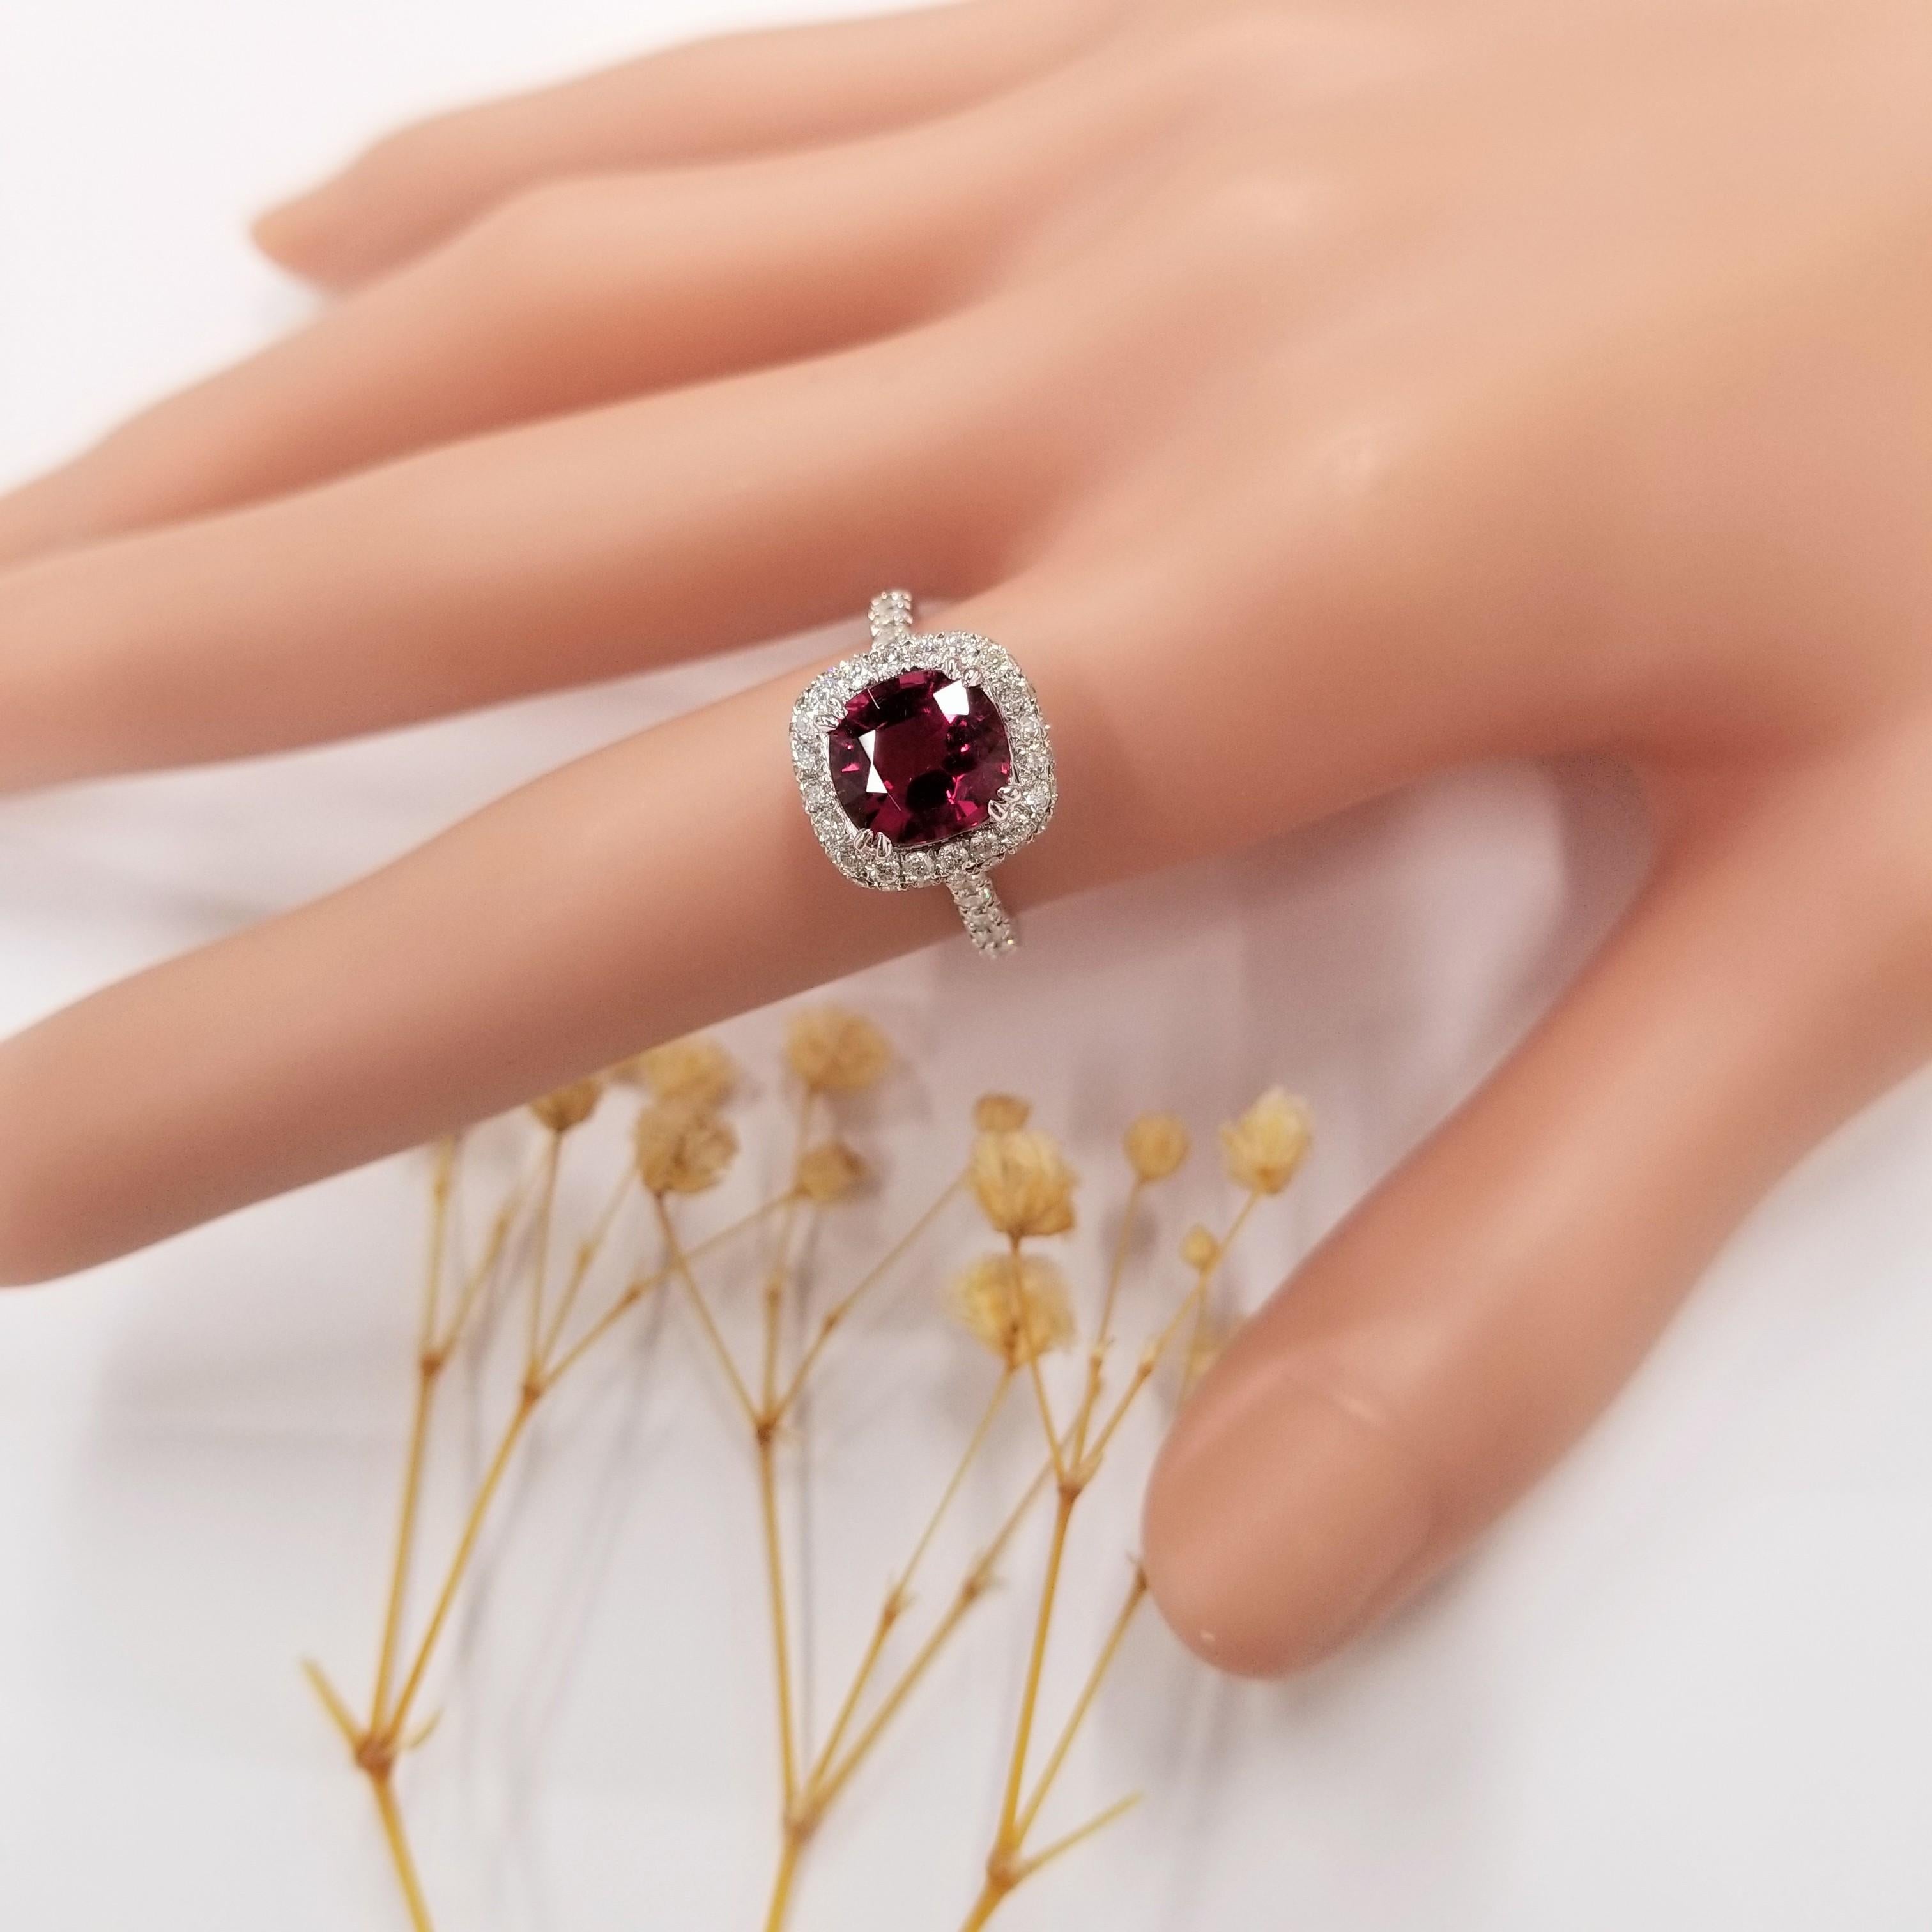 Introducing a show-stopper that will take your breath away, behold the IGI Certified 2.11 Carat Red Tourmaline Ring. This extraordinary piece features a stunning cushion-shaped red tourmaline that has been certified by IGI, showcasing a vivid